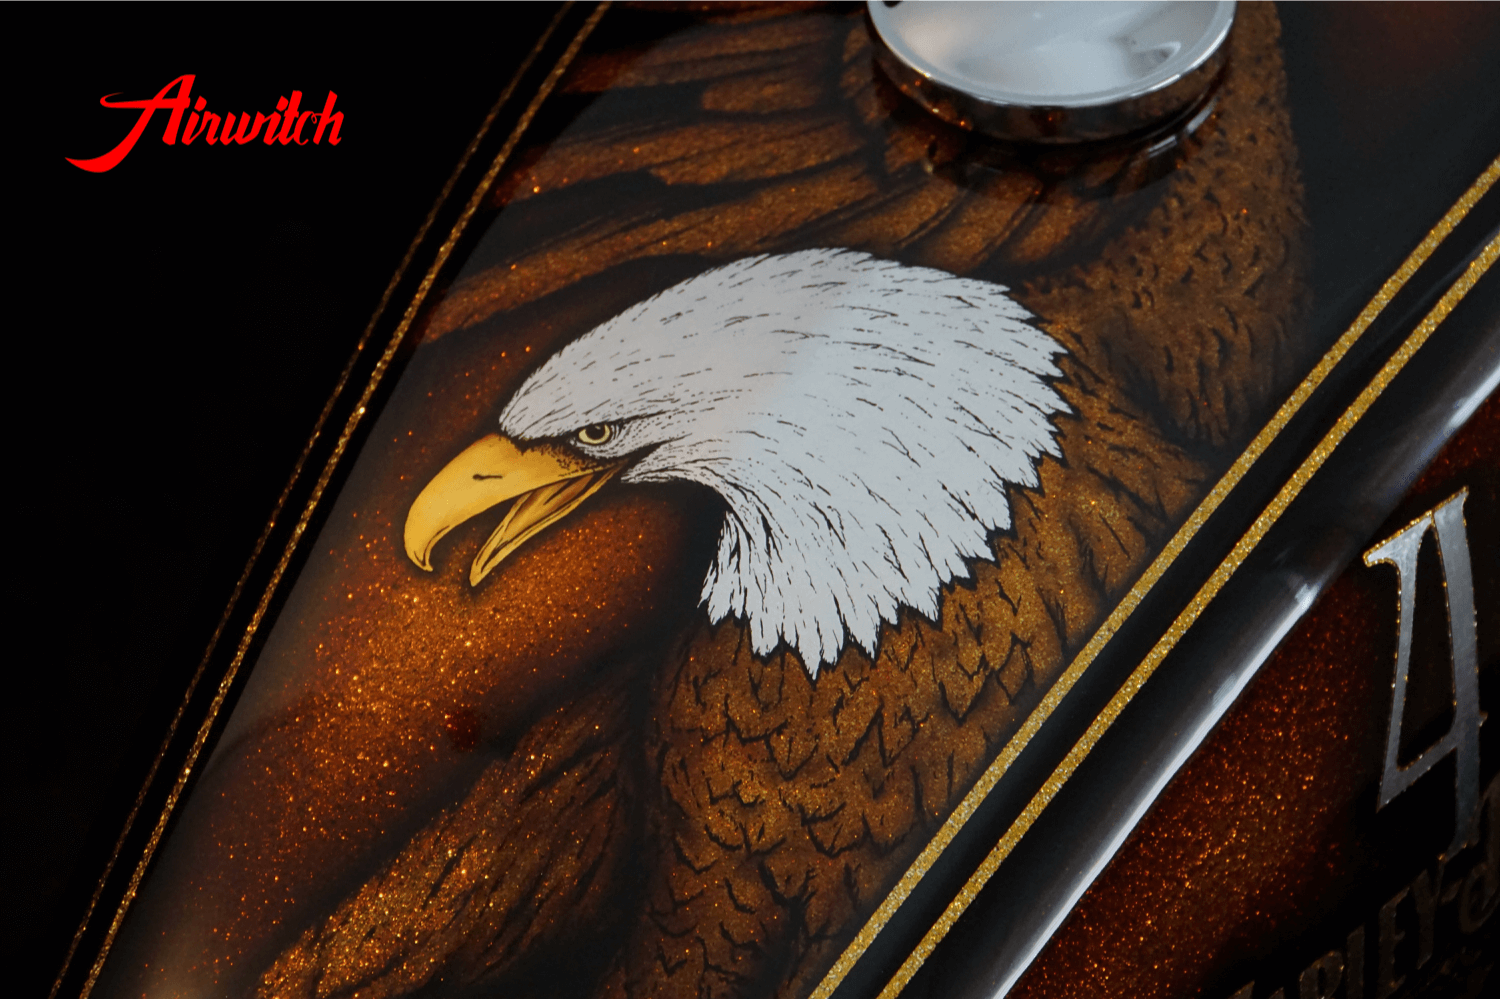 Custom Paint Harley Davidson Sportster Forty Eight Metalflake, Candy Airbrush, Gold & Silver leaf, Eagle